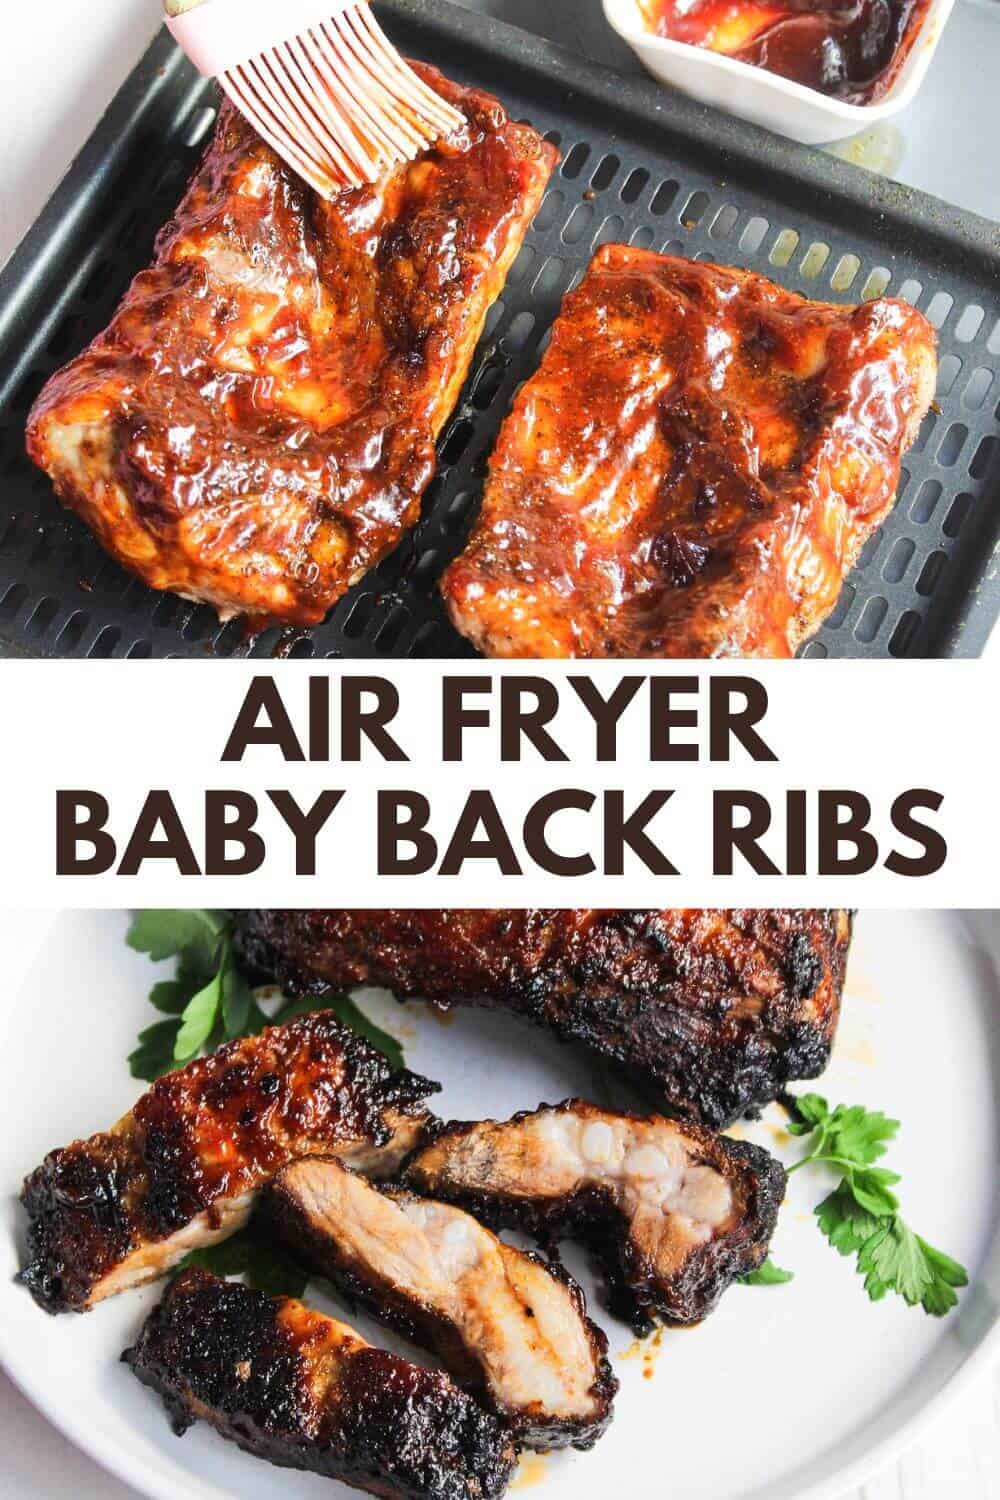 Air fryer baby back ribs on a plate.